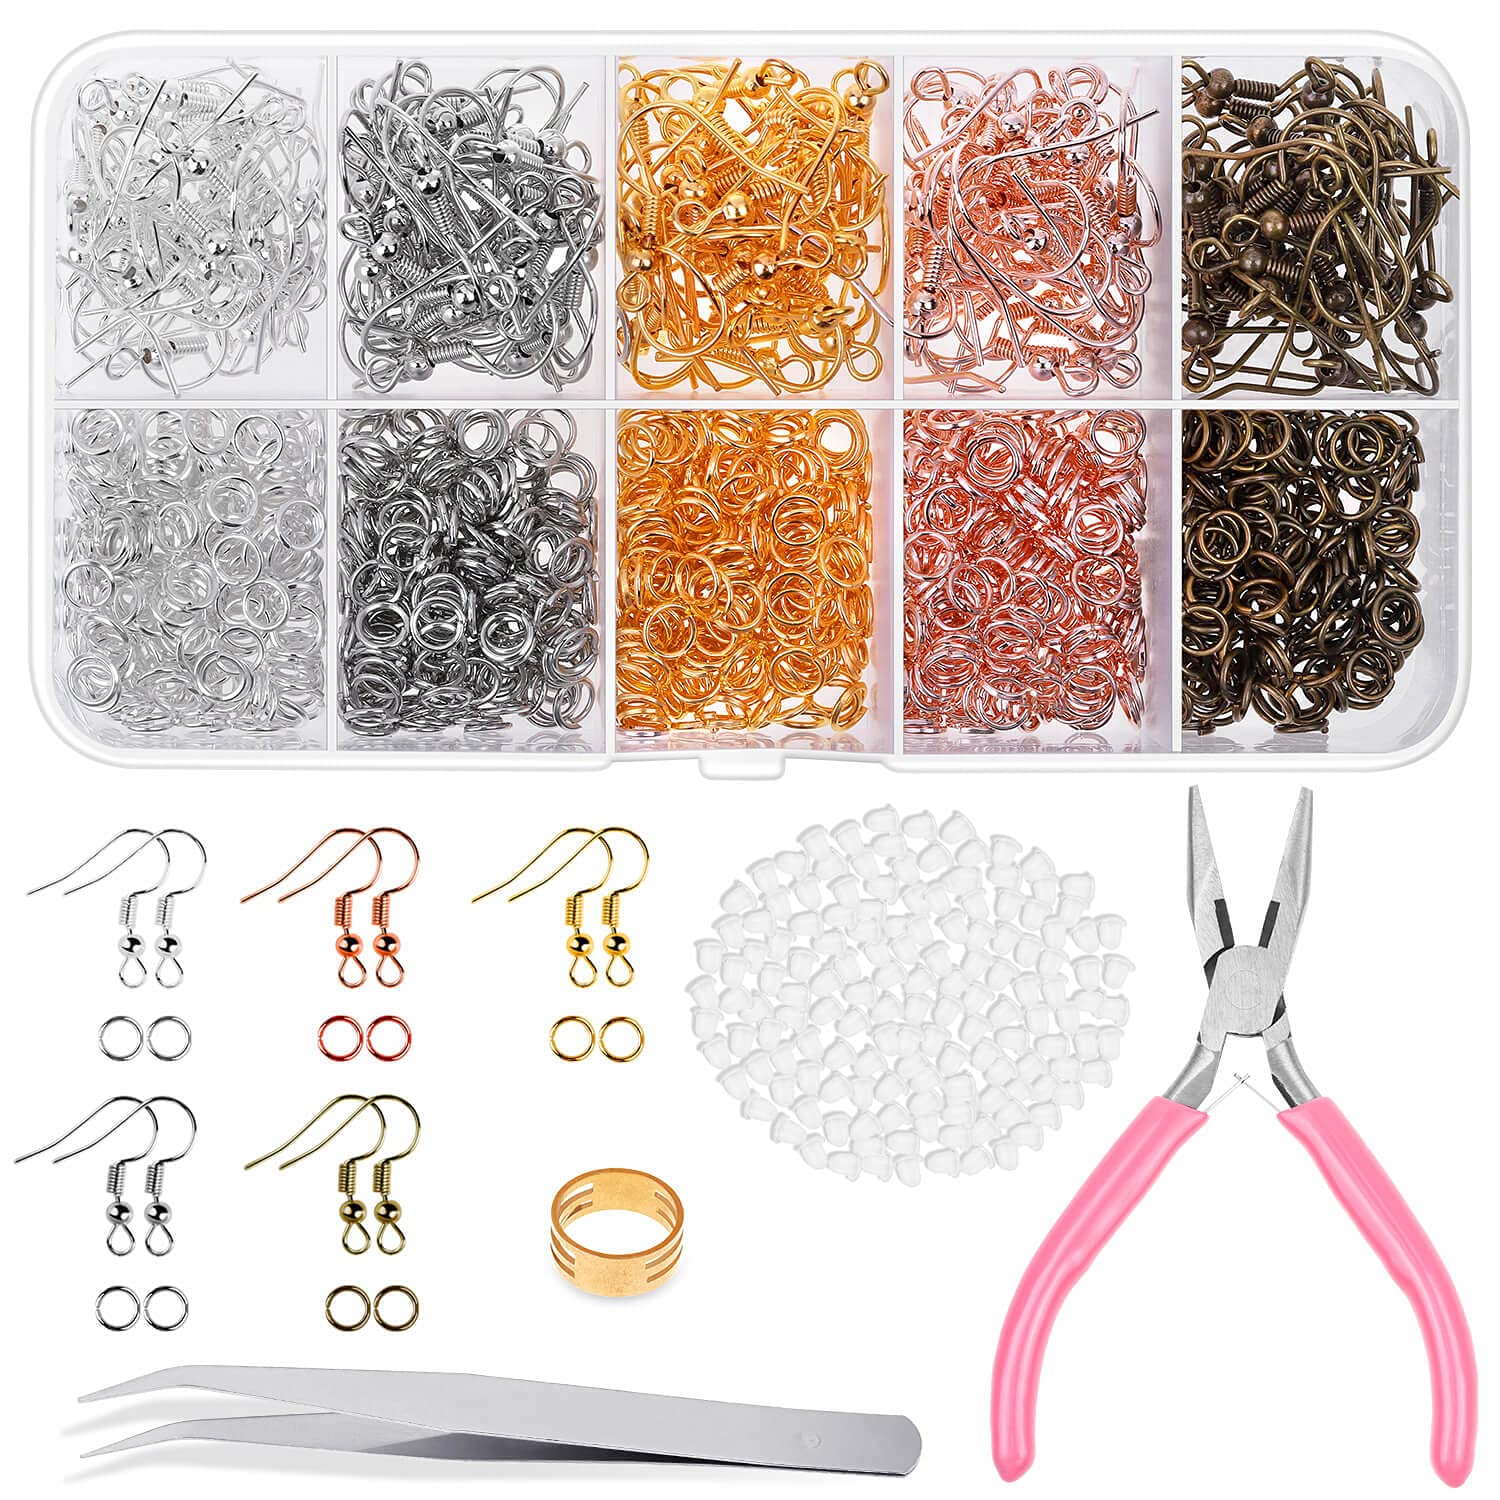 Earring Hooks, Audab 1400pcs Earring Making Kit with 200pcs Ear Ring Hooks,  1000pcs Jump Rings, 200pcs Earring Backs and Jewelry Pliers for Jewelry  Making Supplies Earring Findings